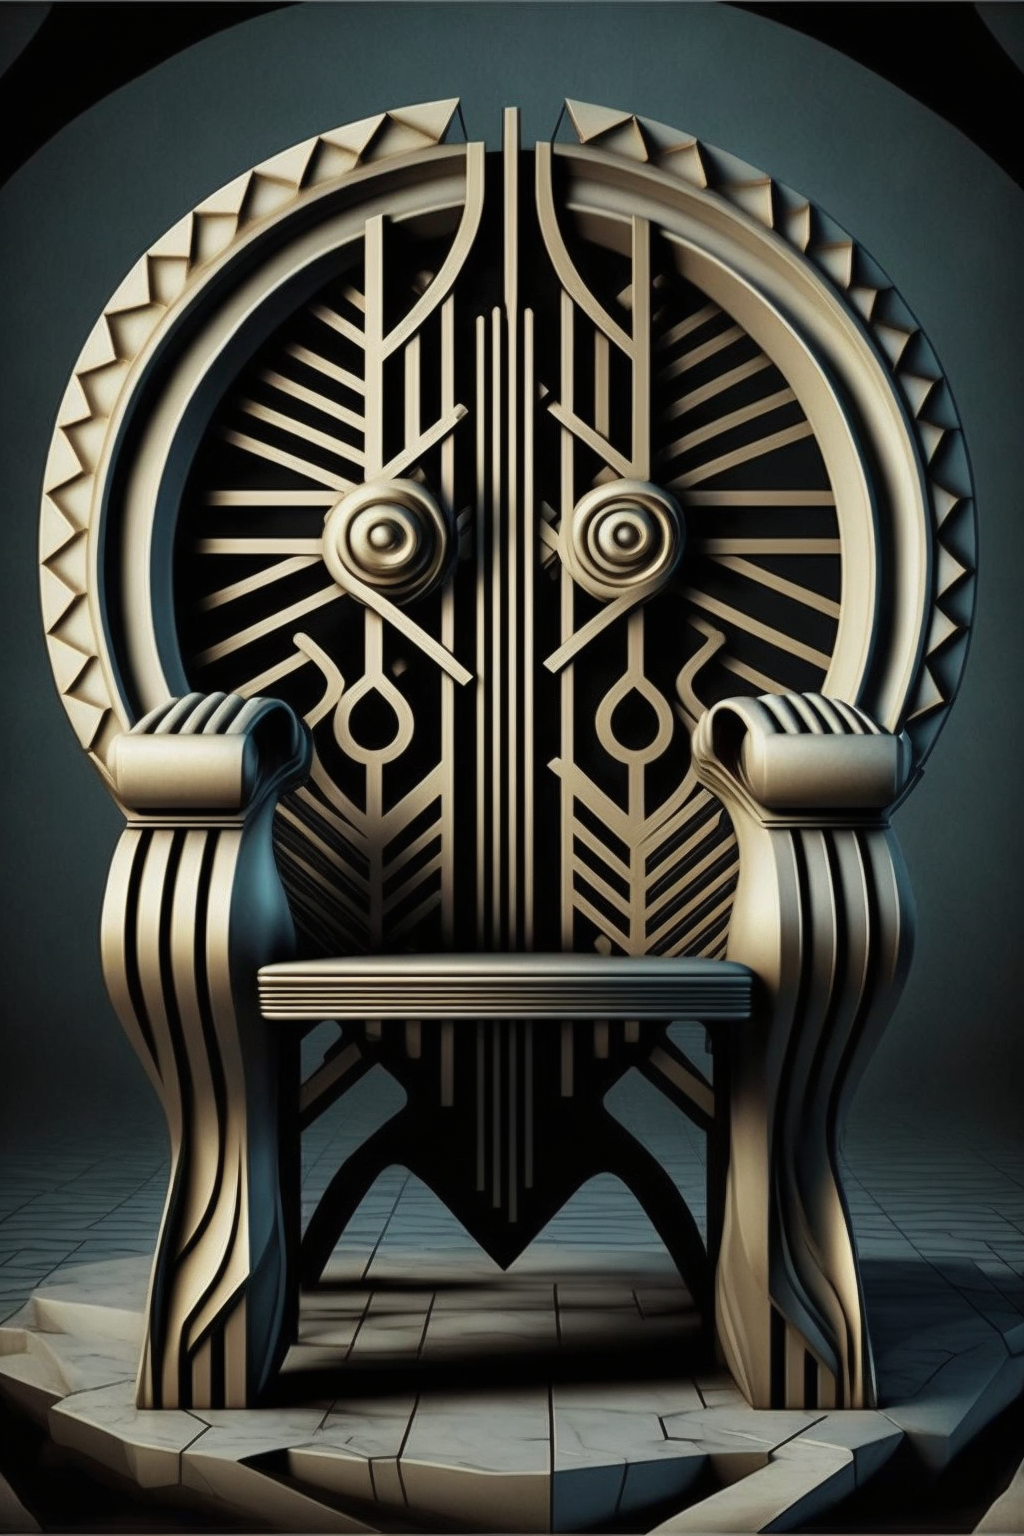 Chair in the style of Mechano-Gothic Deco-Futurism 6